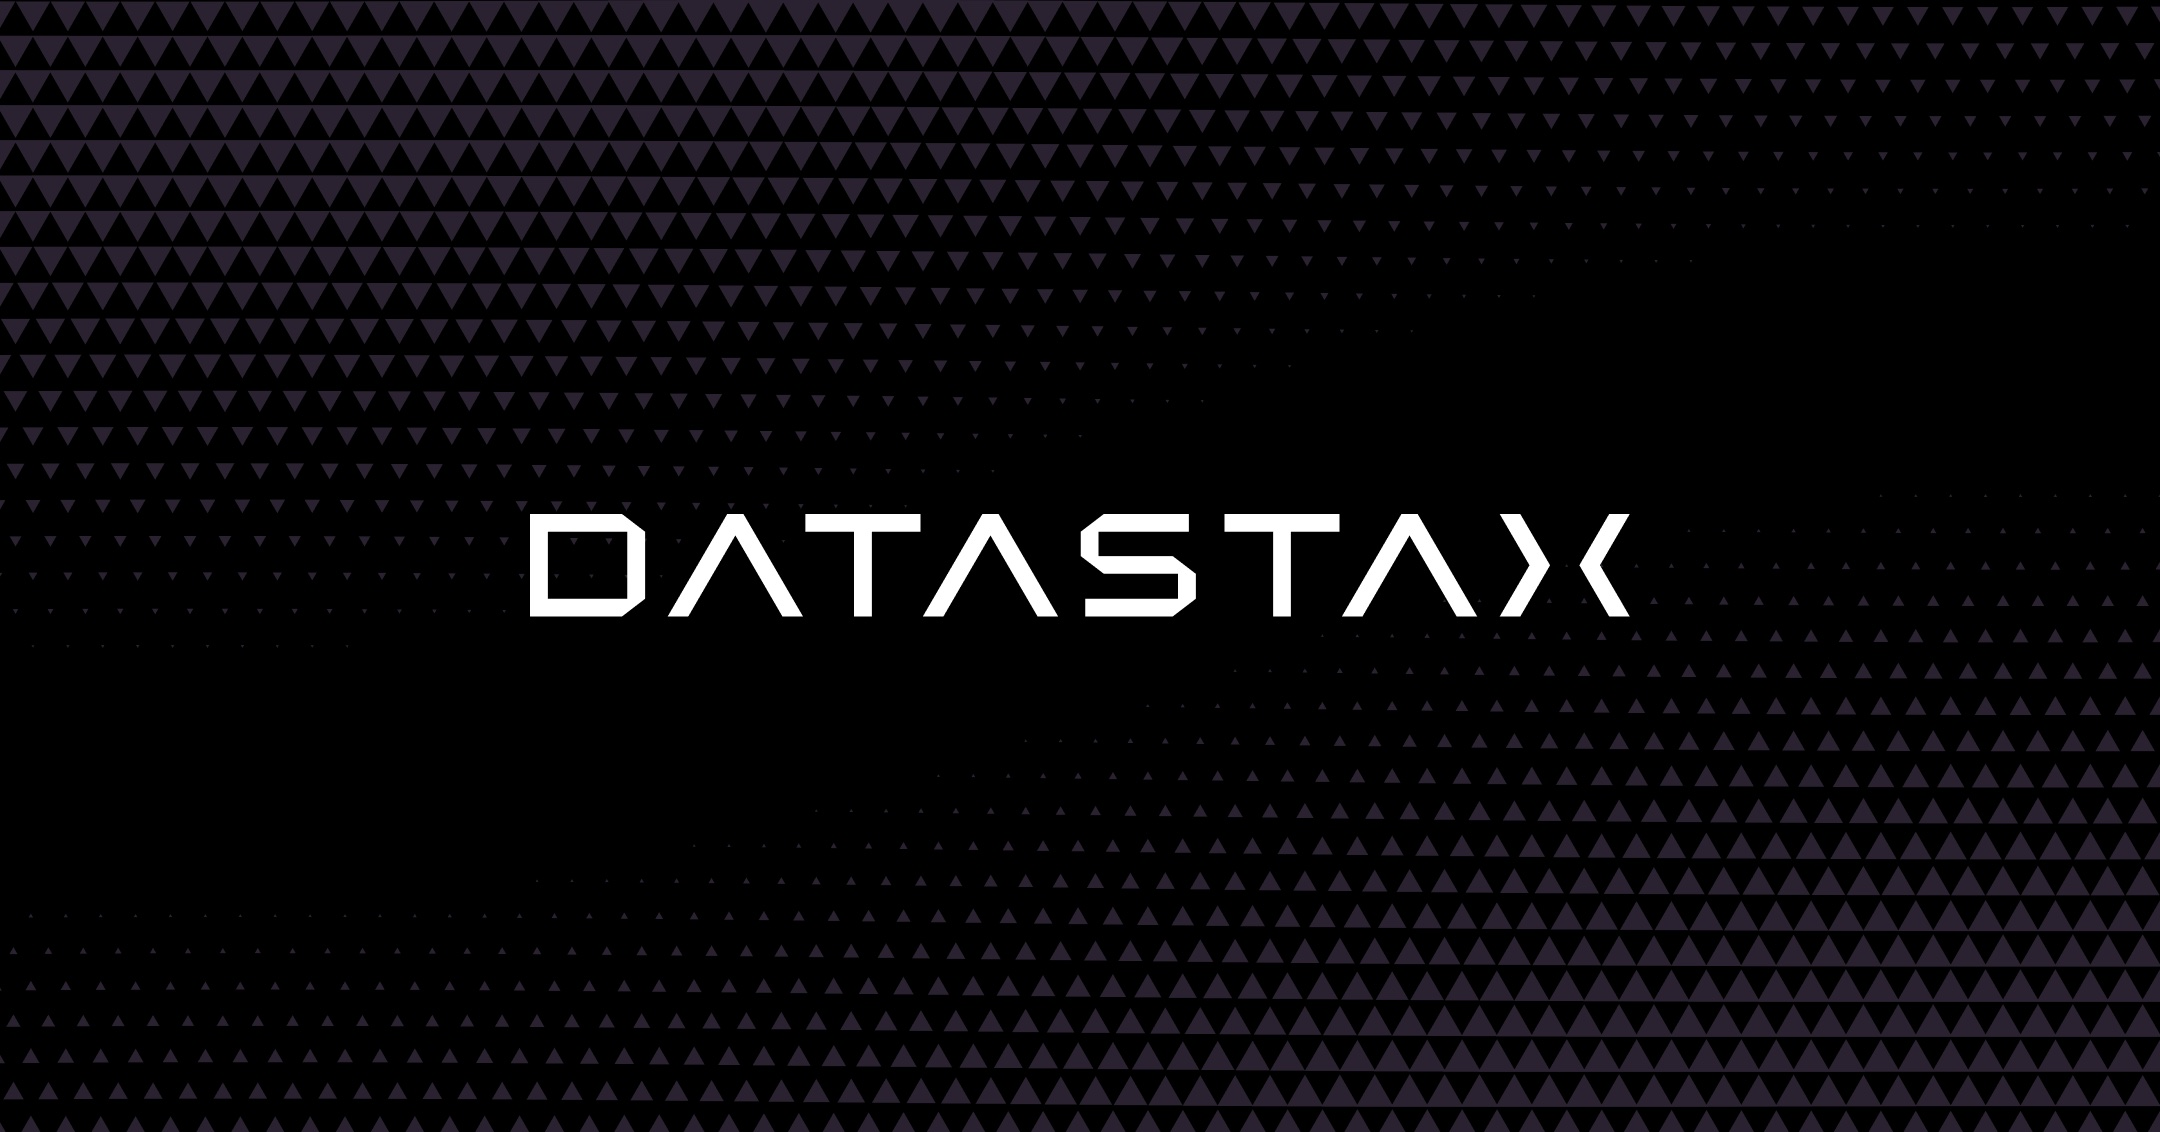 DataStax Quick Reference Guide for CQL